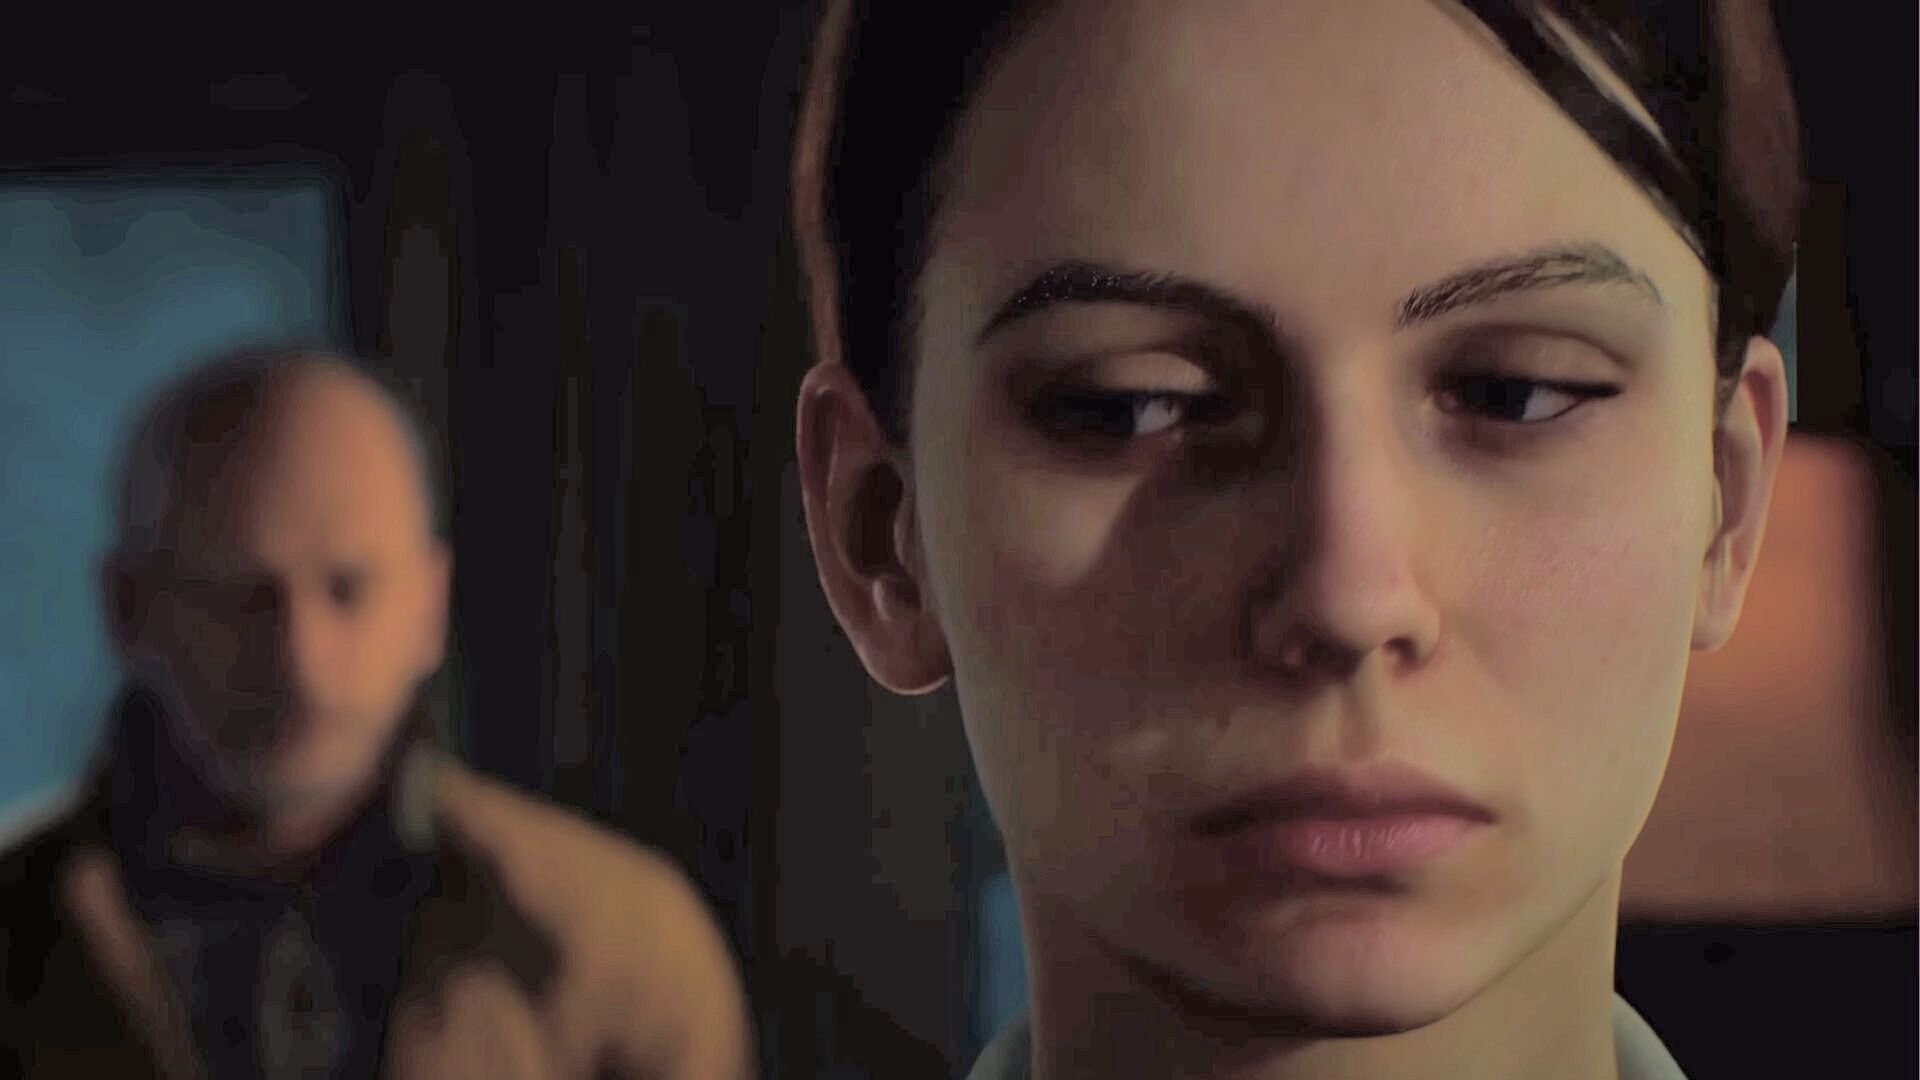 Silent Hill: Ascension is an interactive streaming series coming